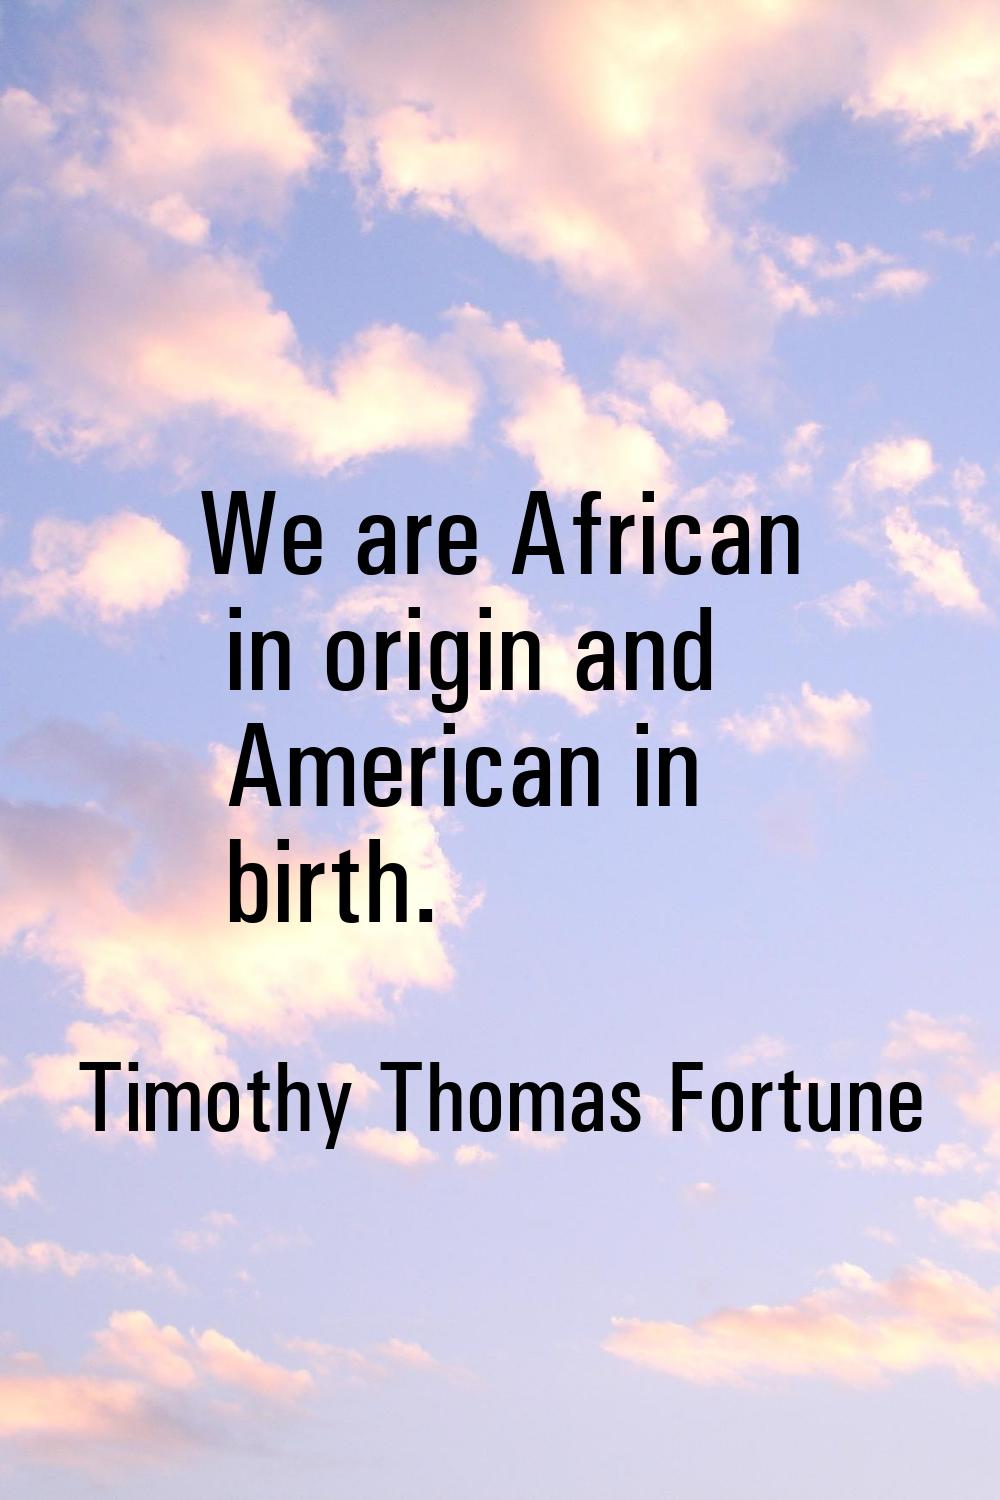 We are African in origin and American in birth.